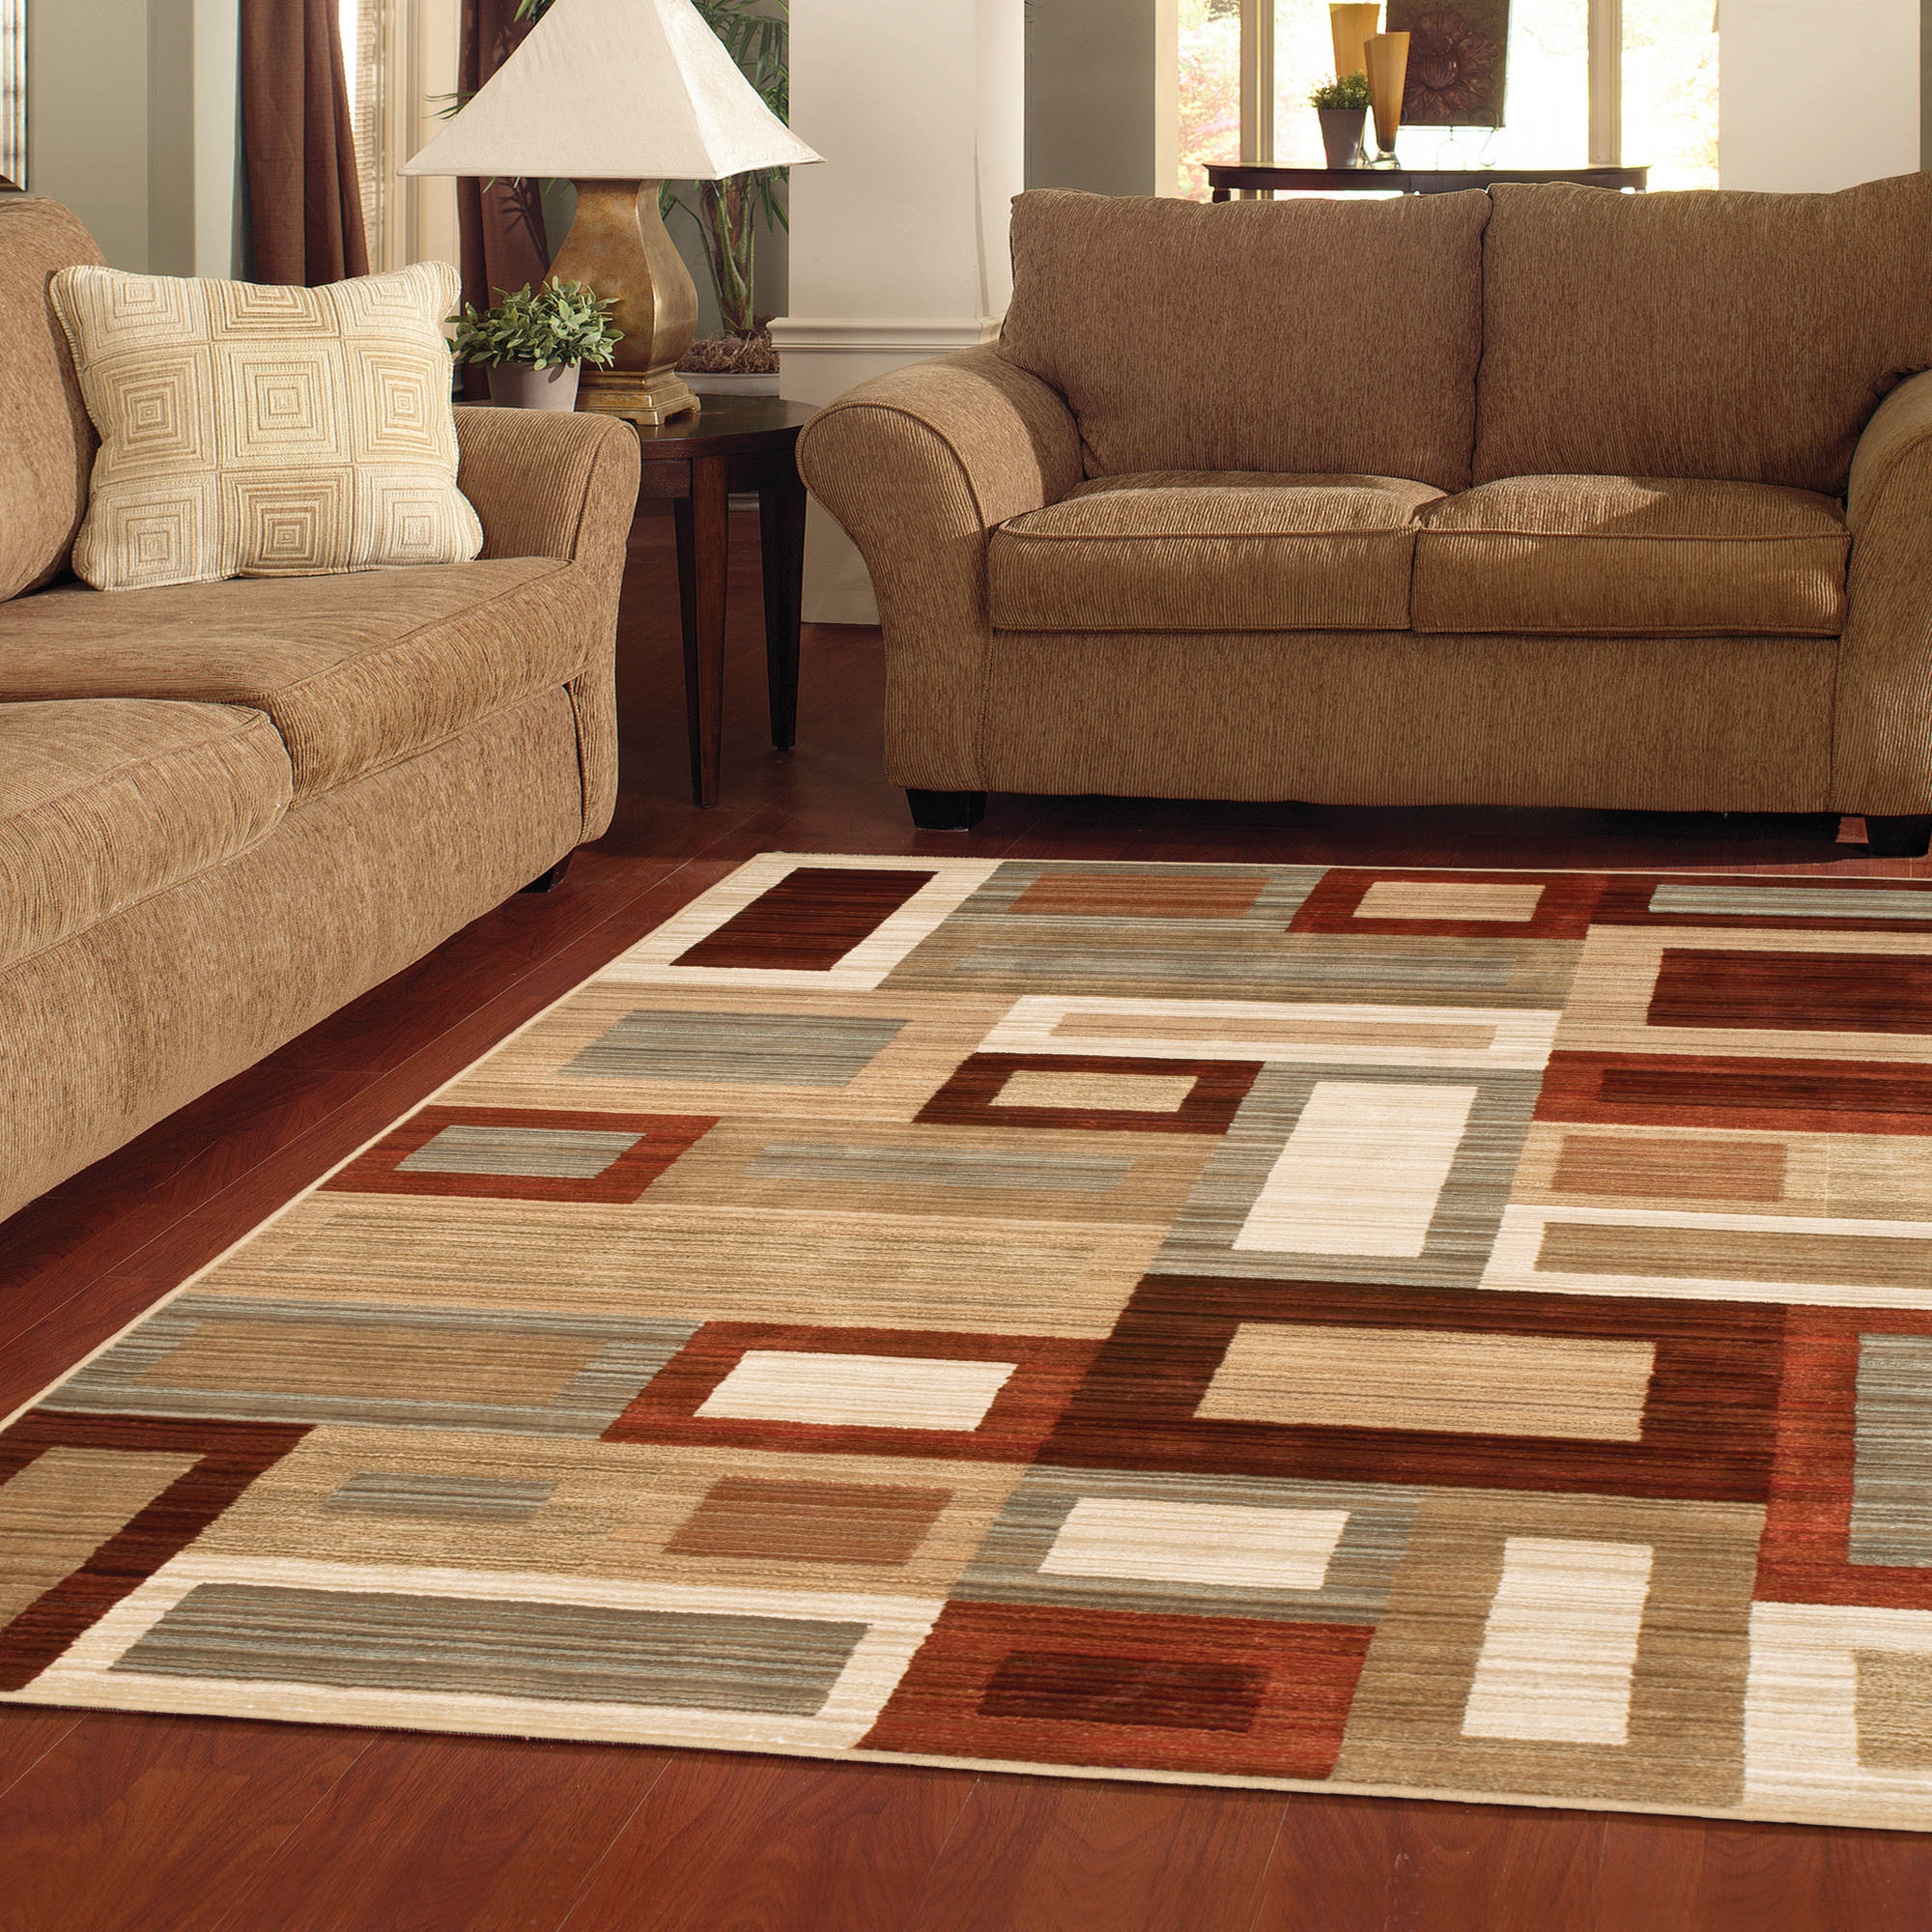 Walmart Living Room Rugs
 20 Collection of Hallway Runners at Walmart